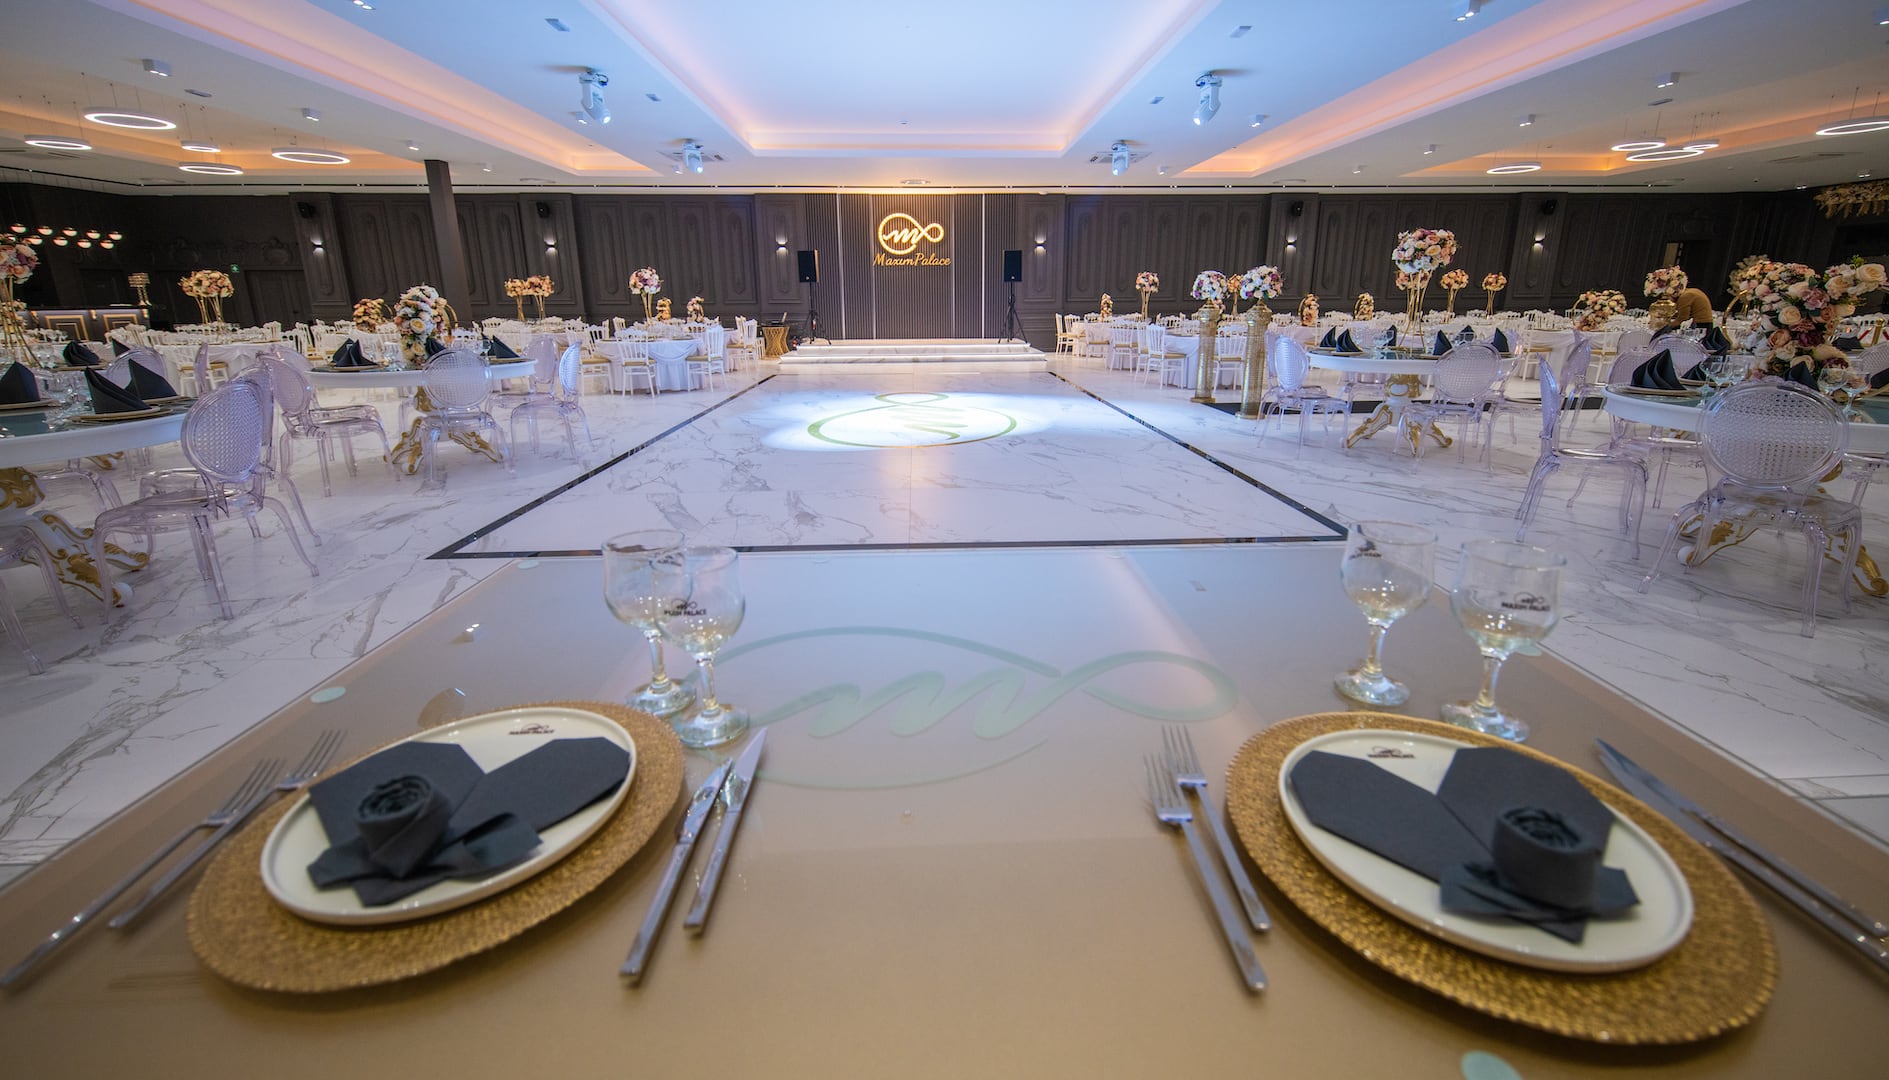 The ultimate event venue with
unparalleled facilities!
